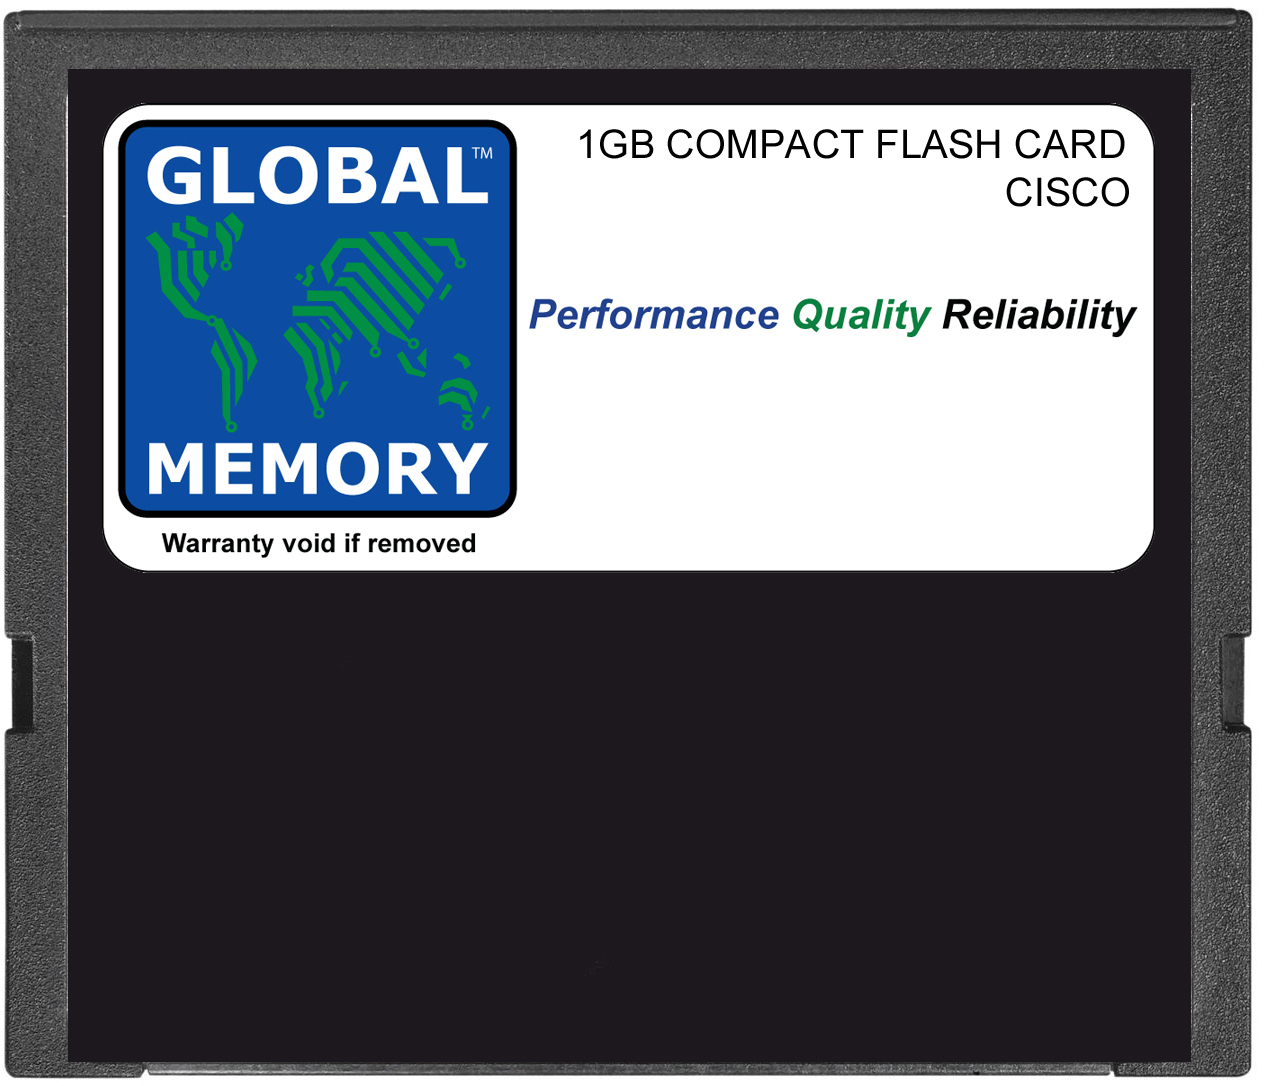 1GB COMPACT FLASH CARD MEMORY FOR CISCO XR12000 SERIES ROUTERS PRP-2 ROUTE PROCESSORS (FLASH-PRP2-1G) - Click Image to Close